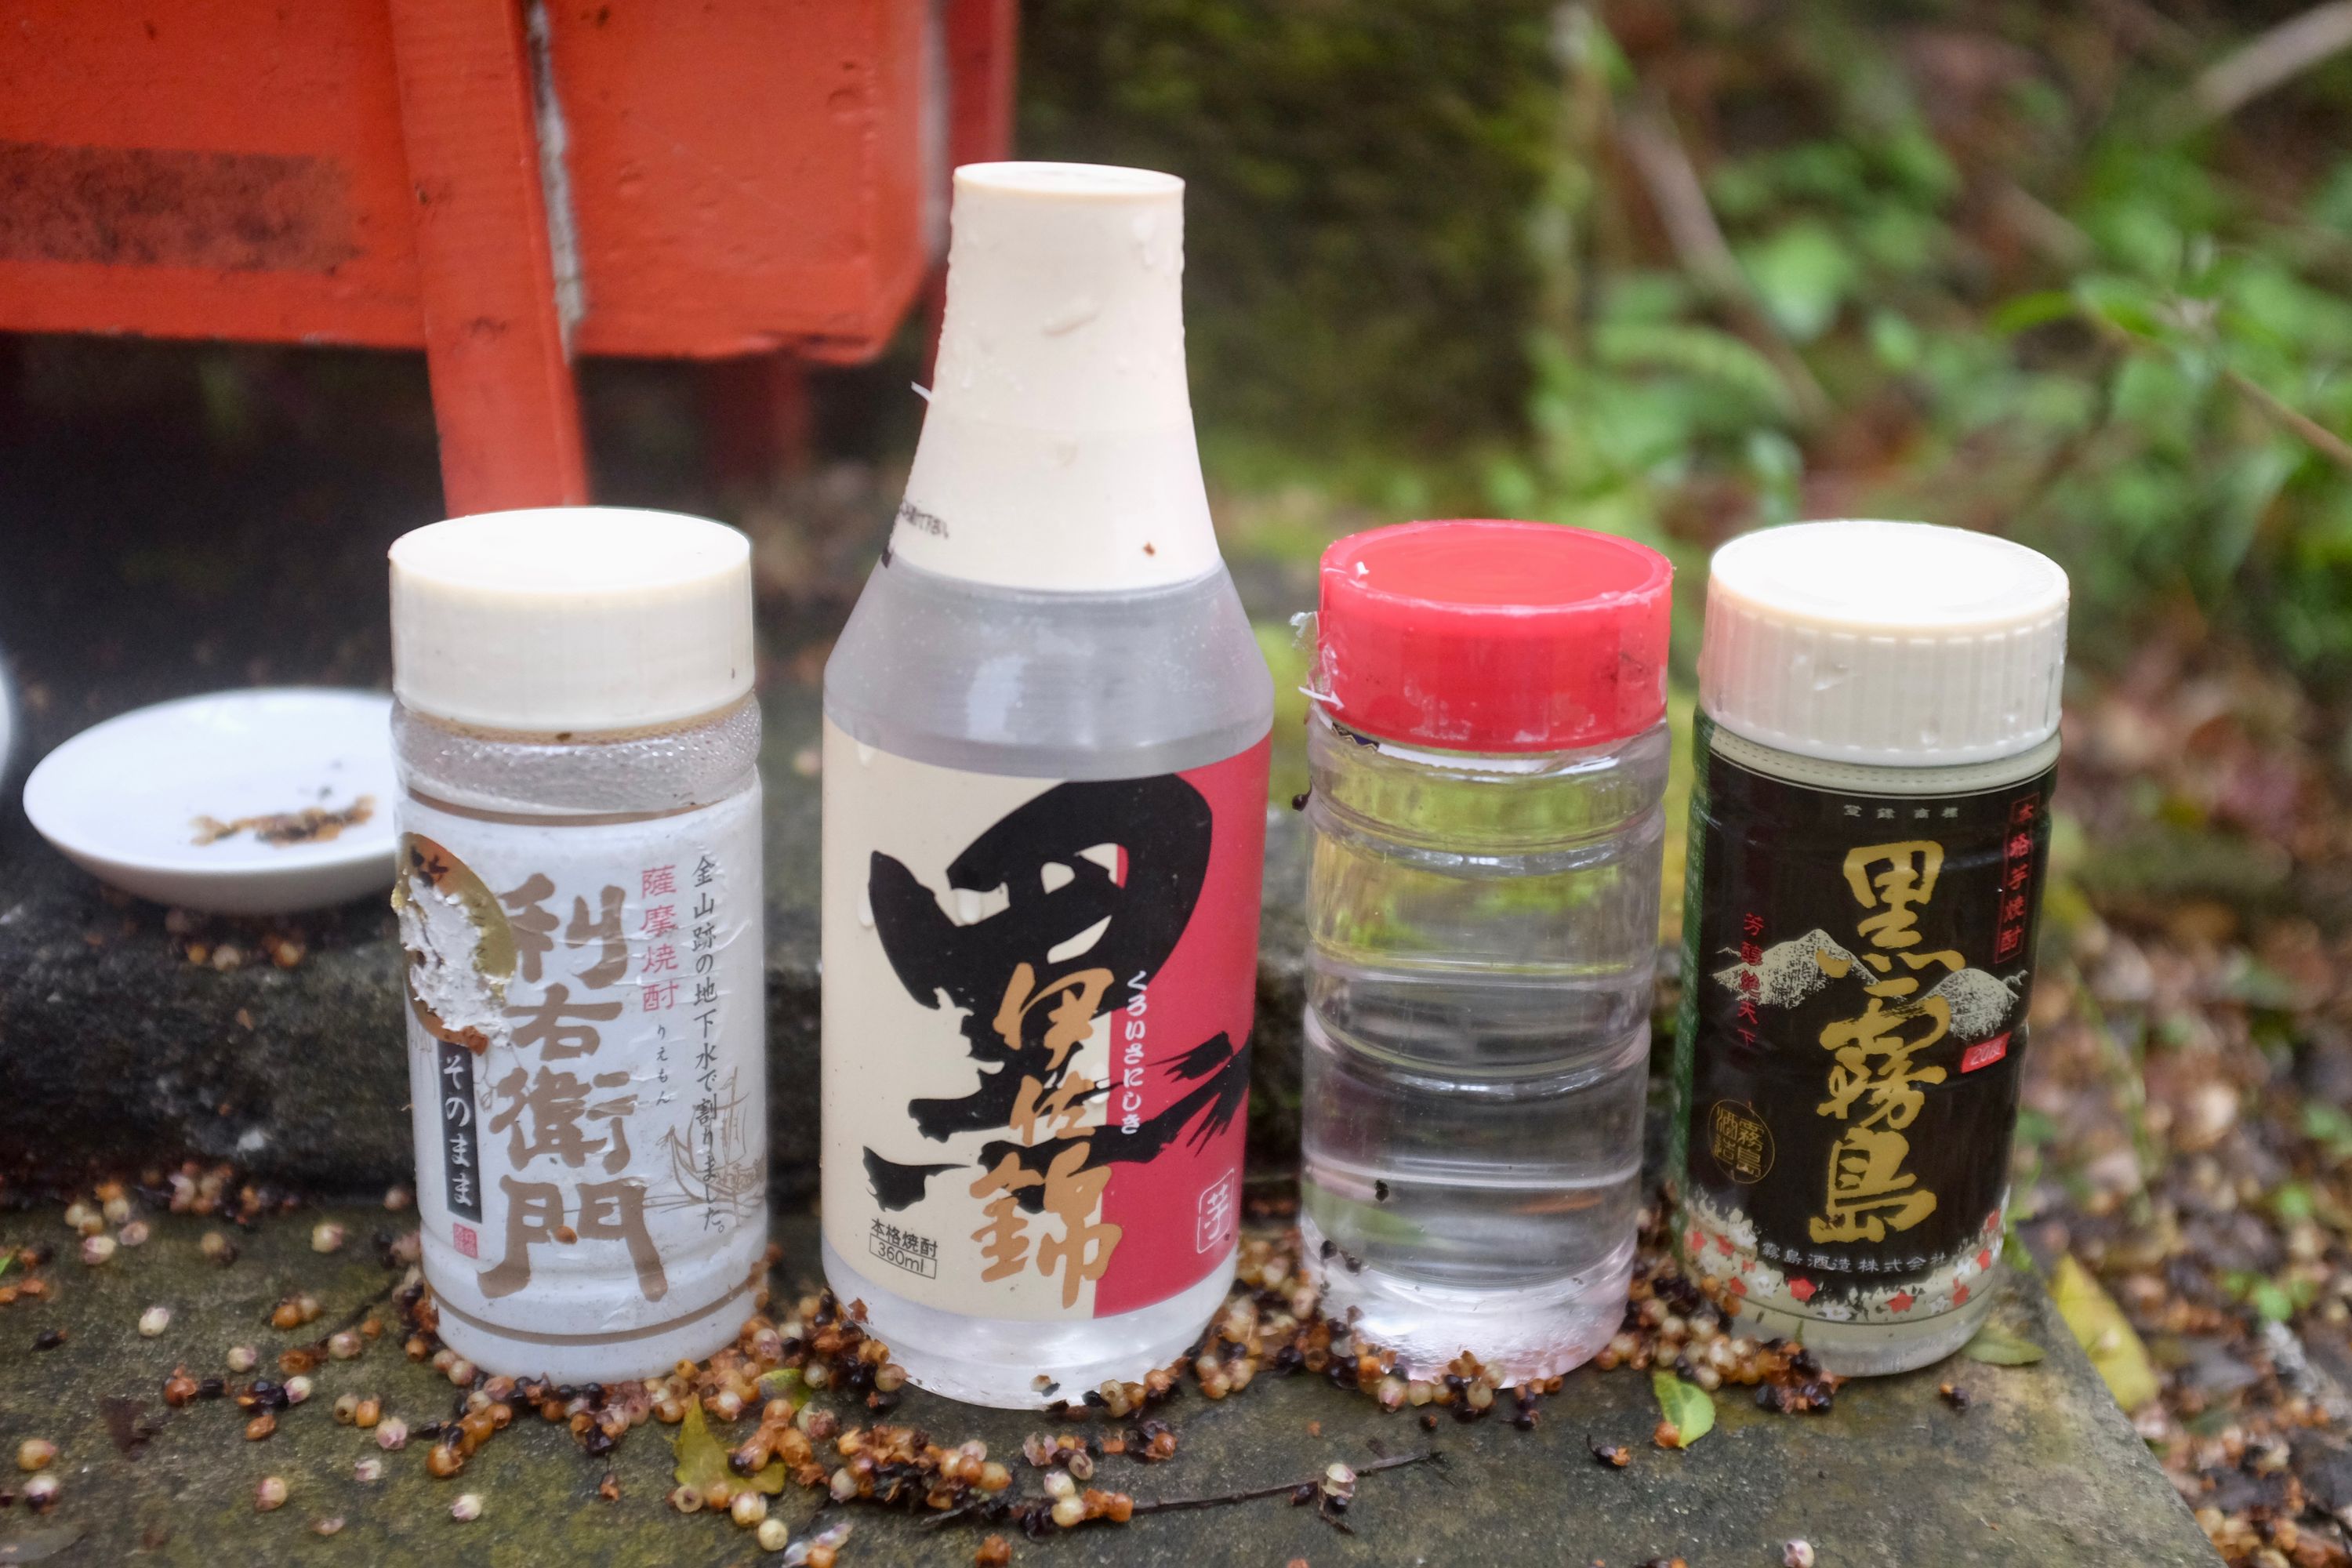 Offerings of shōchū to the volcano god at the summit shrine of Mount Kaimon.